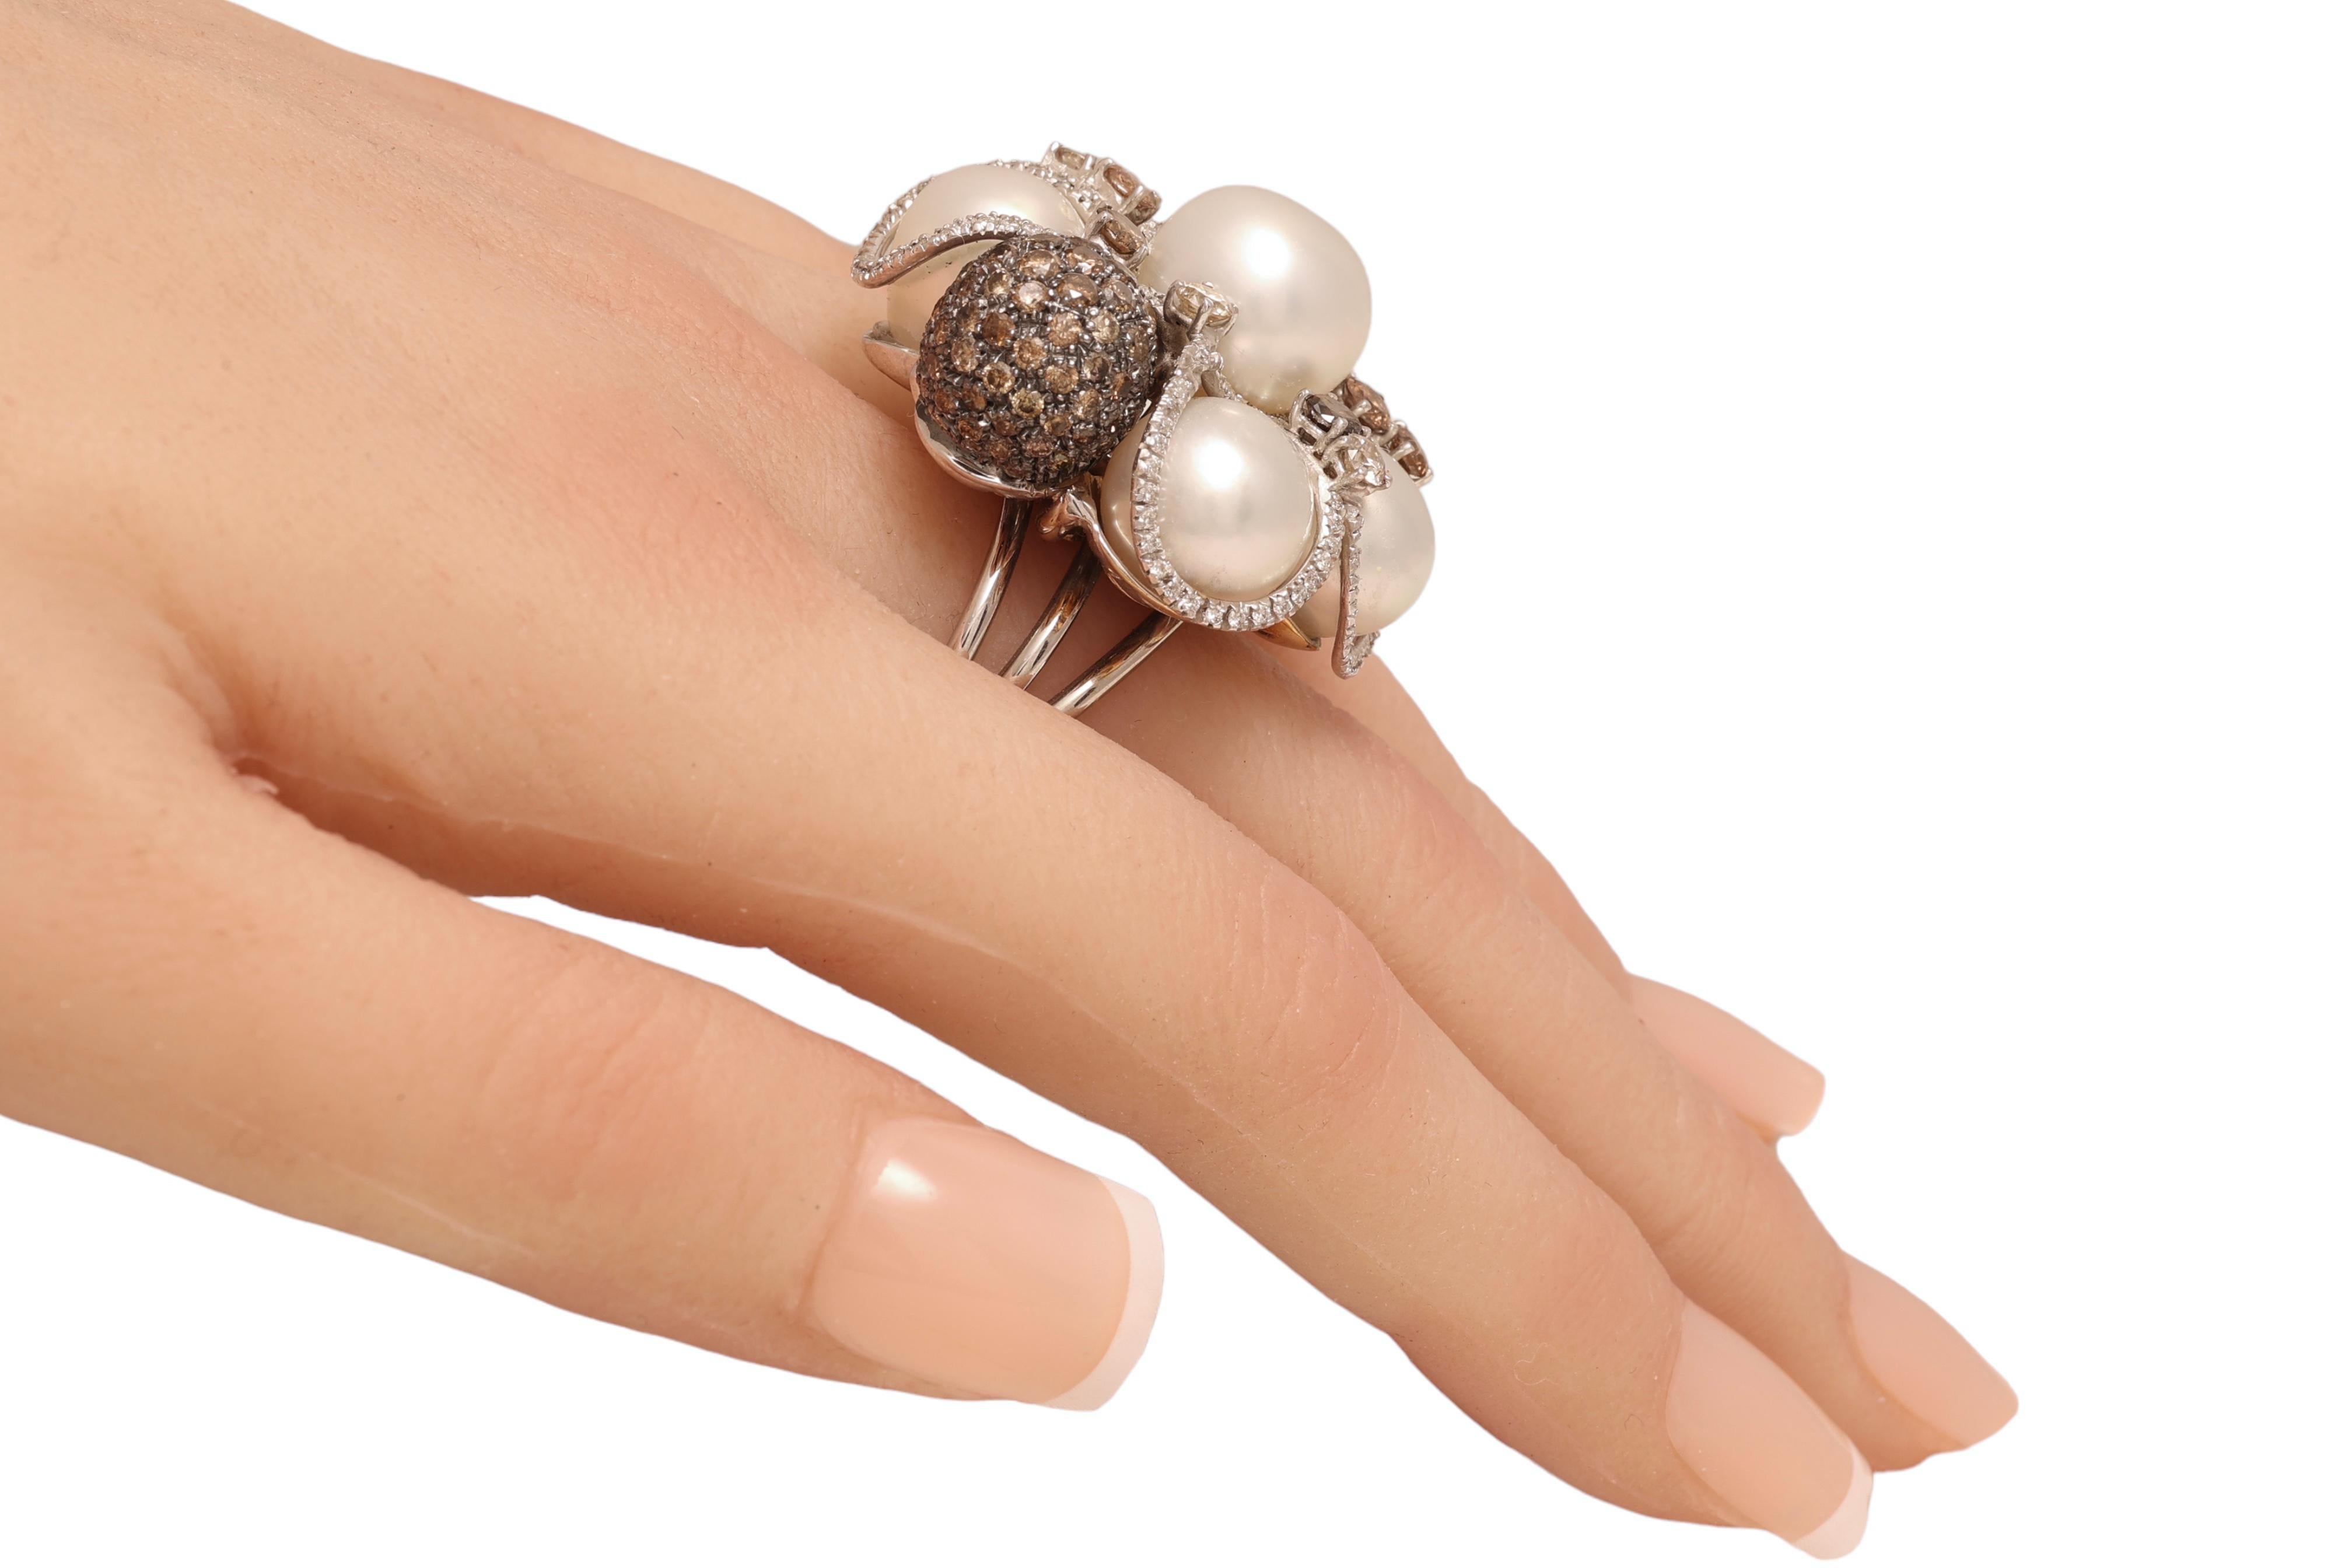 18kt White Gold Ring with 3.65ct Diamonds& Pearls, Can Purchase with Bracelet For Sale 5